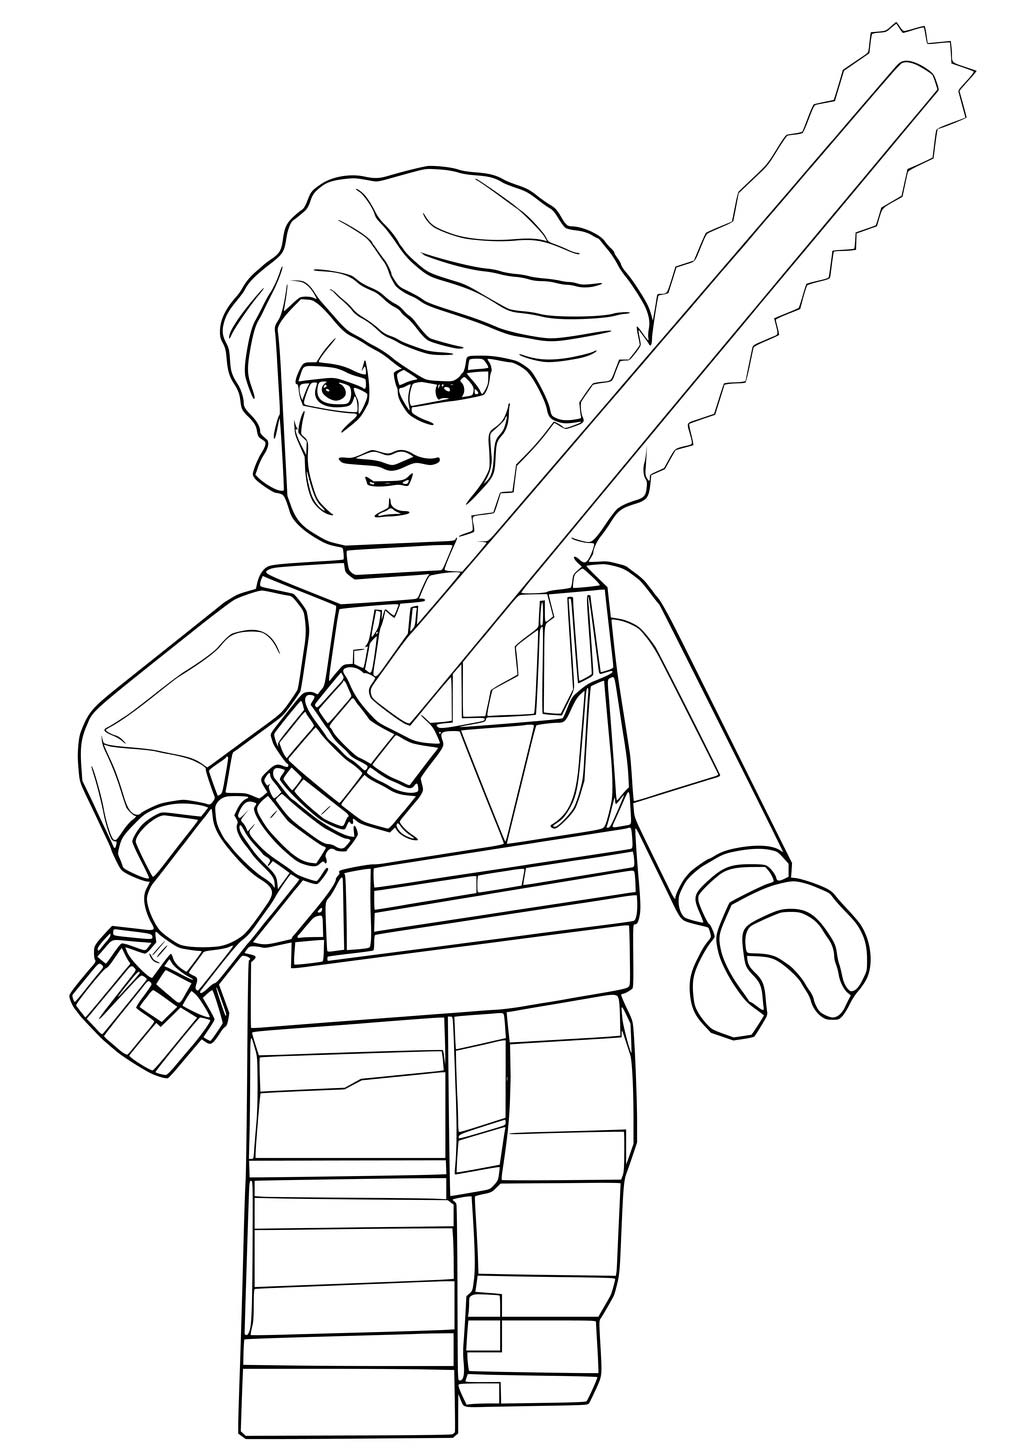 Lego Anakin Skywalker Coloring Page